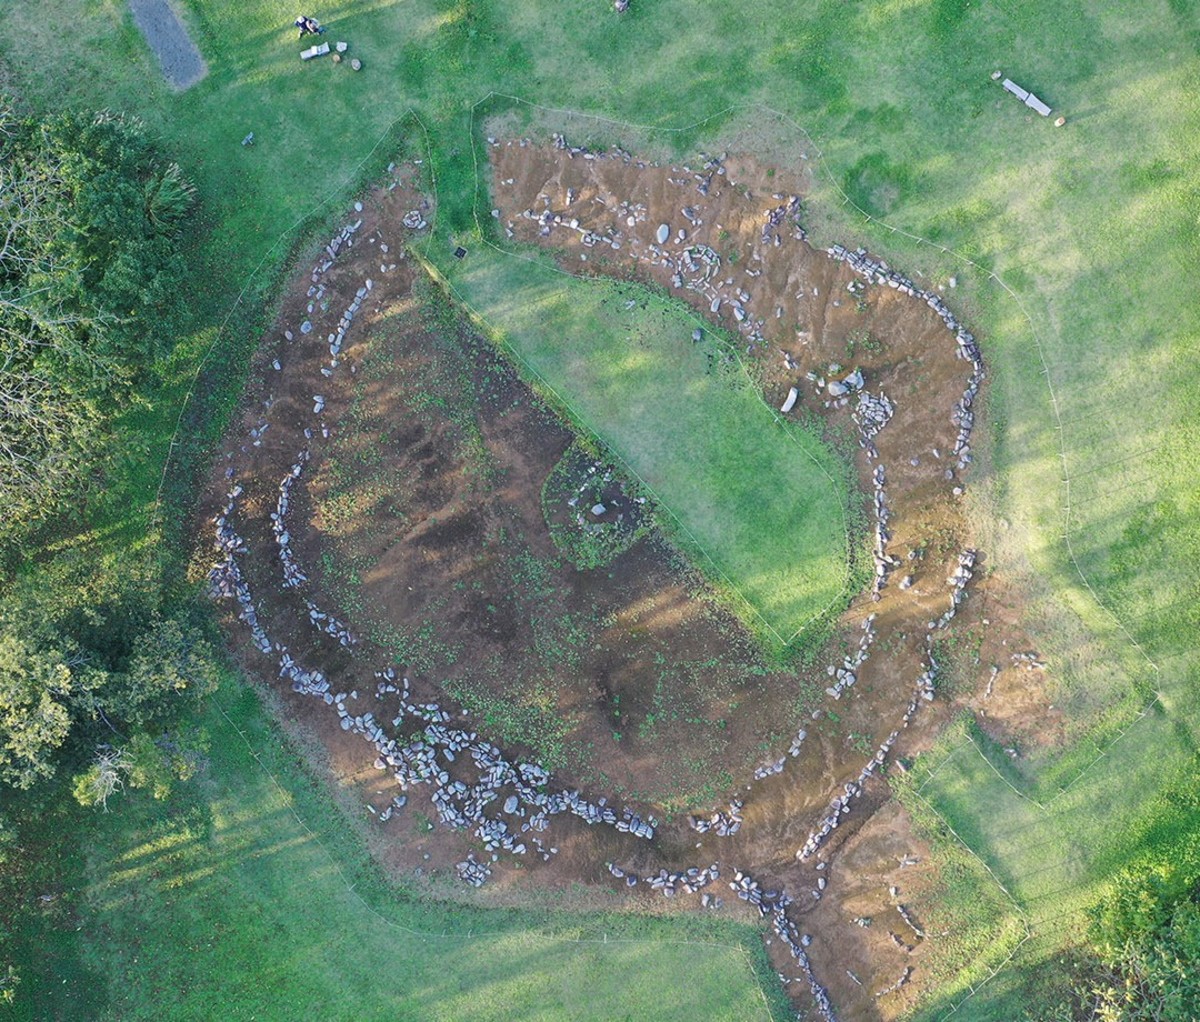 A circular ruin from a site belonging to the Jomon people of Japan.